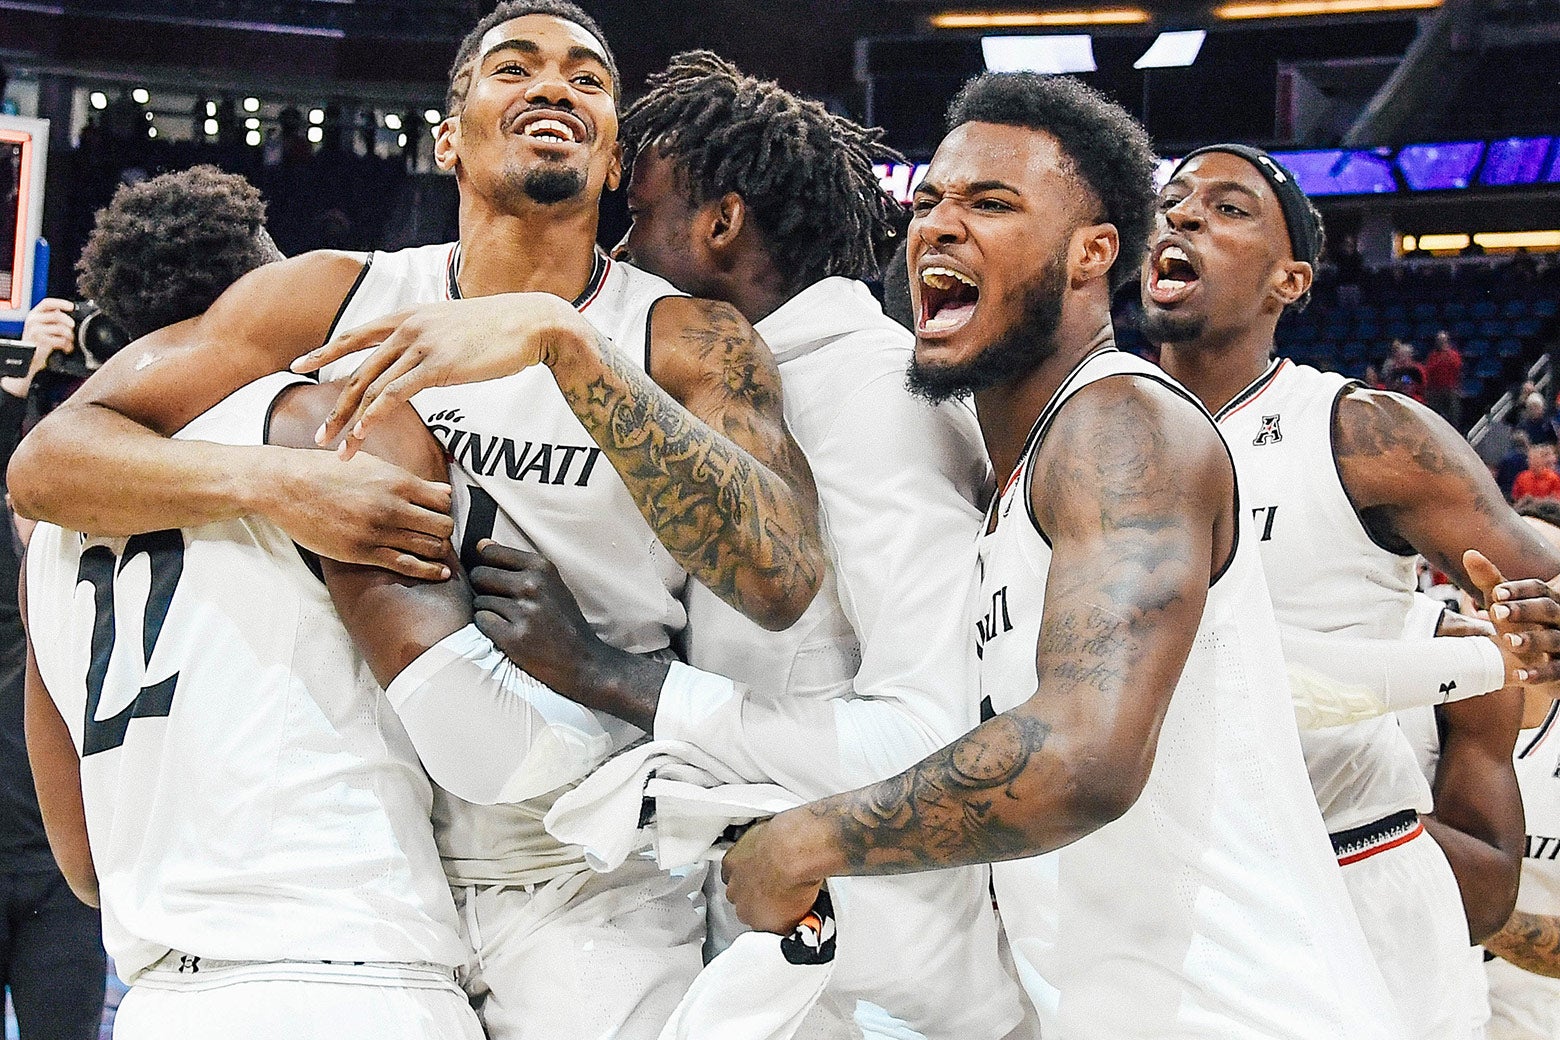 The Cincinnati Bearcats celebrate their championship after the final game of the 2018 AAC Basketball Championship against the Houston Cougars at Amway Center on Sunday in Orlando, Florida.